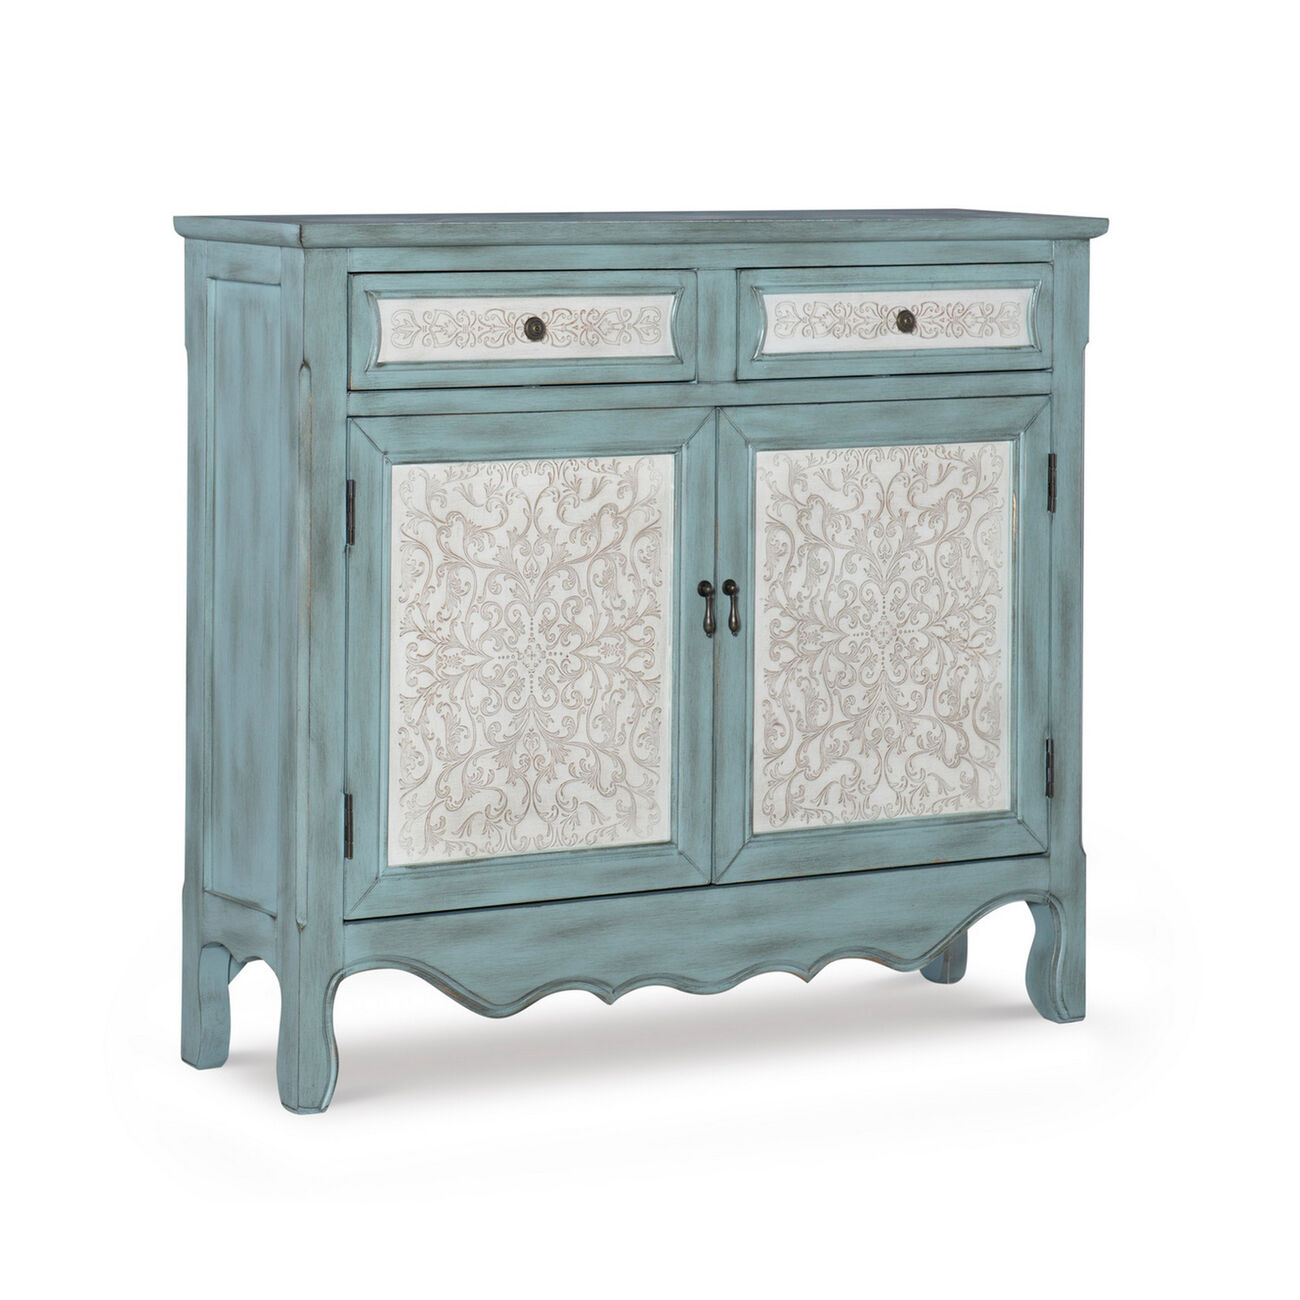 Traditional Style Wooden Console with 2 Door Storage, Blue and White